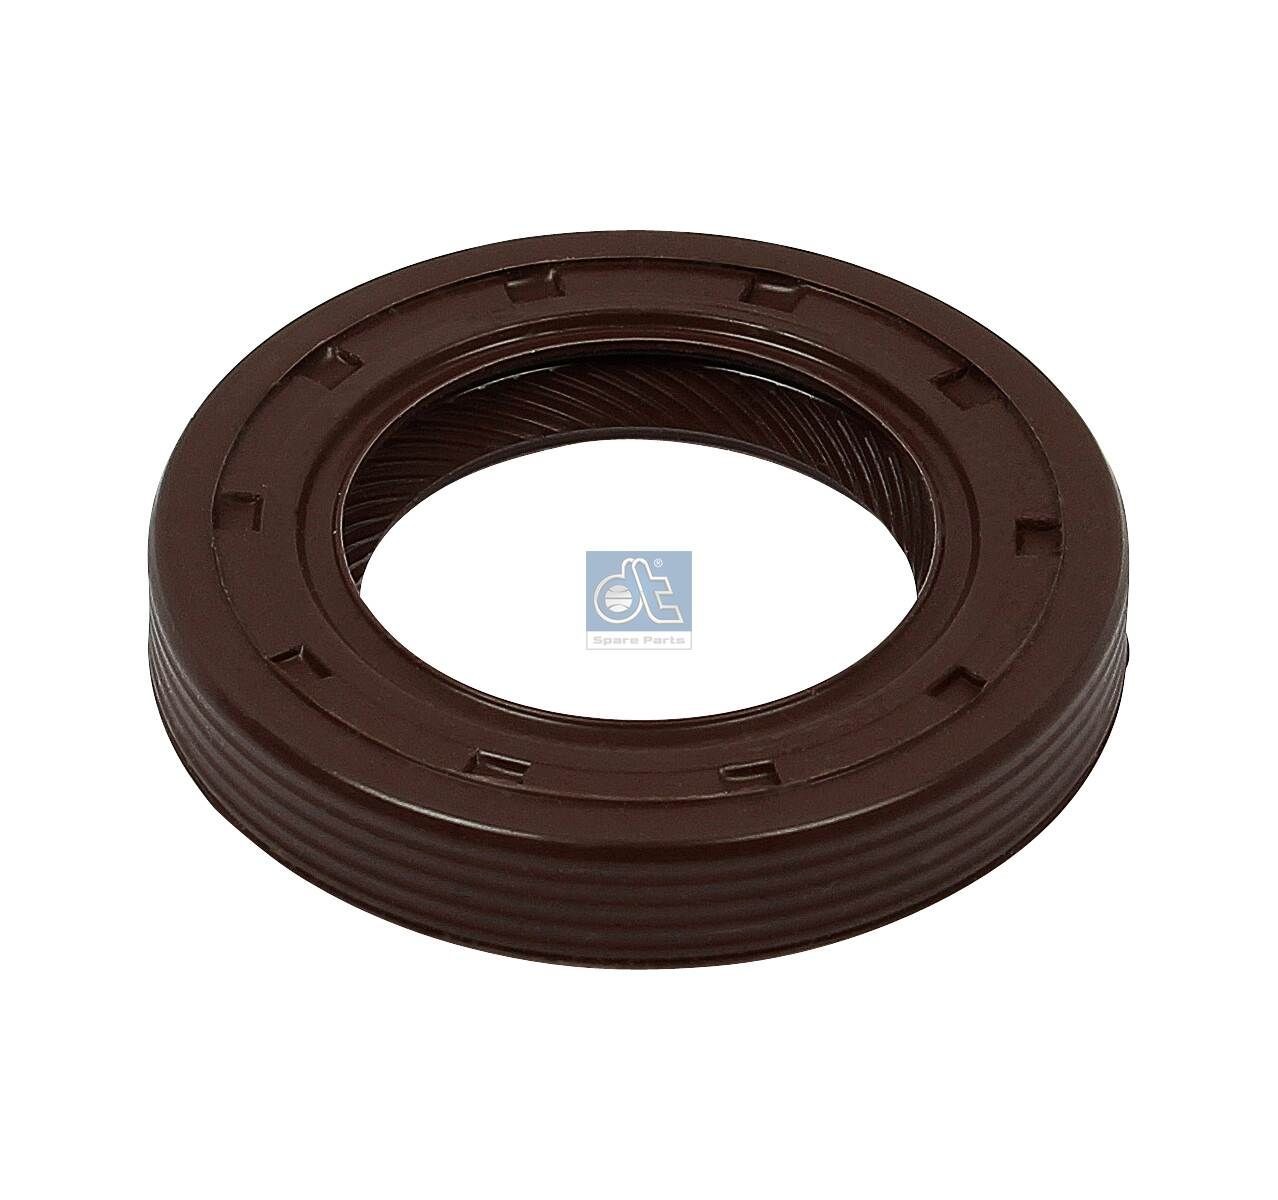 DT Spare Parts 6.22211 Camshaft seal frontal sided